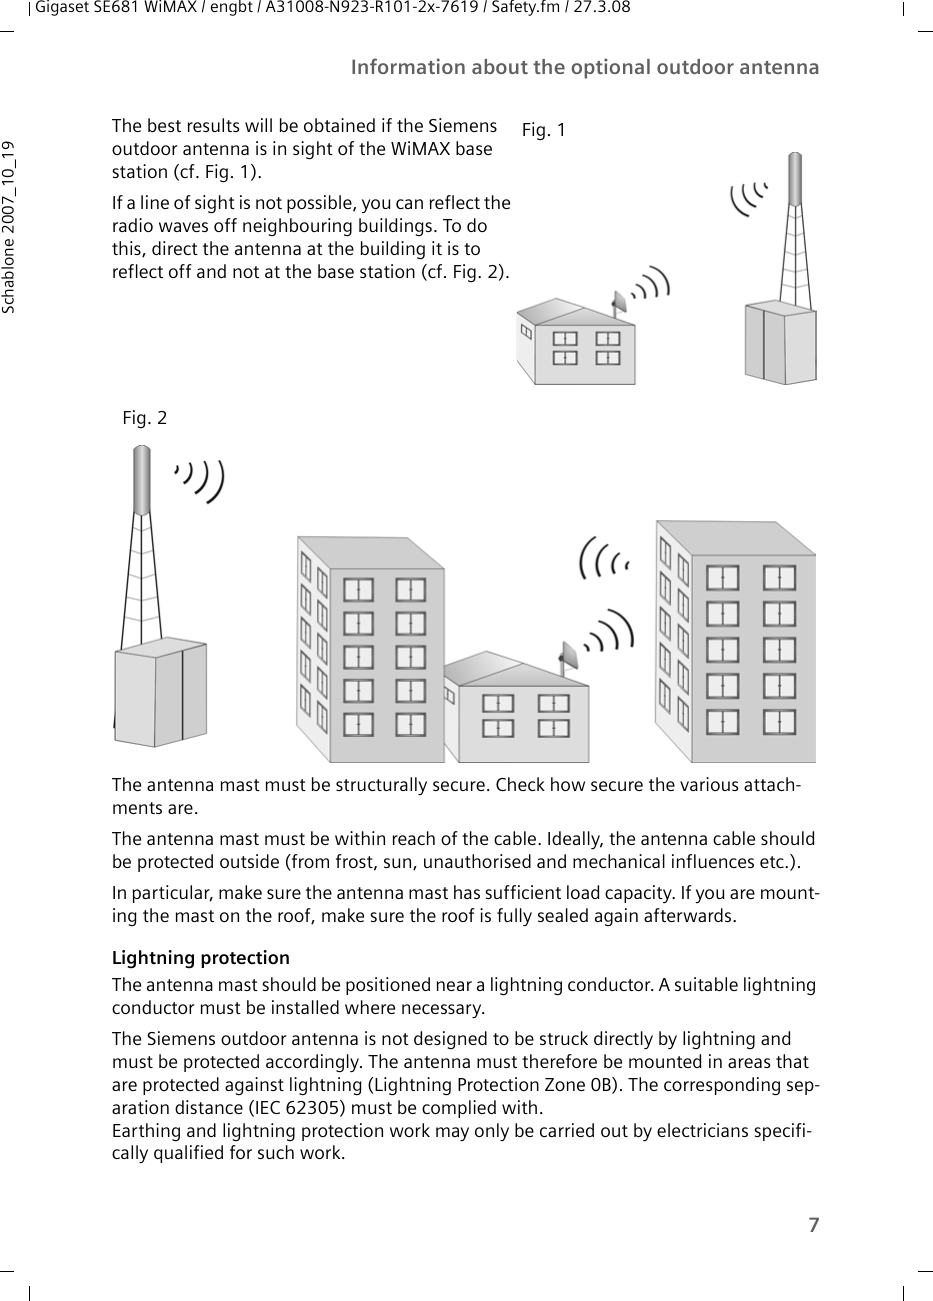 7Information about the optional outdoor antennaGigaset SE681 WiMAX / engbt / A31008-N923-R101-2x-7619 / Safety.fm / 27.3.08Schablone 2007_10_19The antenna mast must be structurally secure. Check how secure the various attach-ments are. The antenna mast must be within reach of the cable. Ideally, the antenna cable should be protected outside (from frost, sun, unauthorised and mechanical influences etc.). In particular, make sure the antenna mast has sufficient load capacity. If you are mount-ing the mast on the roof, make sure the roof is fully sealed again afterwards.Lightning protectionThe antenna mast should be positioned near a lightning conductor. A suitable lightning conductor must be installed where necessary. The Siemens outdoor antenna is not designed to be struck directly by lightning and must be protected accordingly. The antenna must therefore be mounted in areas that are protected against lightning (Lightning Protection Zone 0B). The corresponding sep-aration distance (IEC 62305) must be complied with. Earthing and lightning protection work may only be carried out by electricians specifi-cally qualified for such work.The best results will be obtained if the Siemens outdoor antenna is in sight of the WiMAX base station (cf. Fig. 1).If a line of sight is not possible, you can reflect the radio waves off neighbouring buildings. To do this, direct the antenna at the building it is to reflect off and not at the base station (cf. Fig. 2). Fig. 1Fig. 2